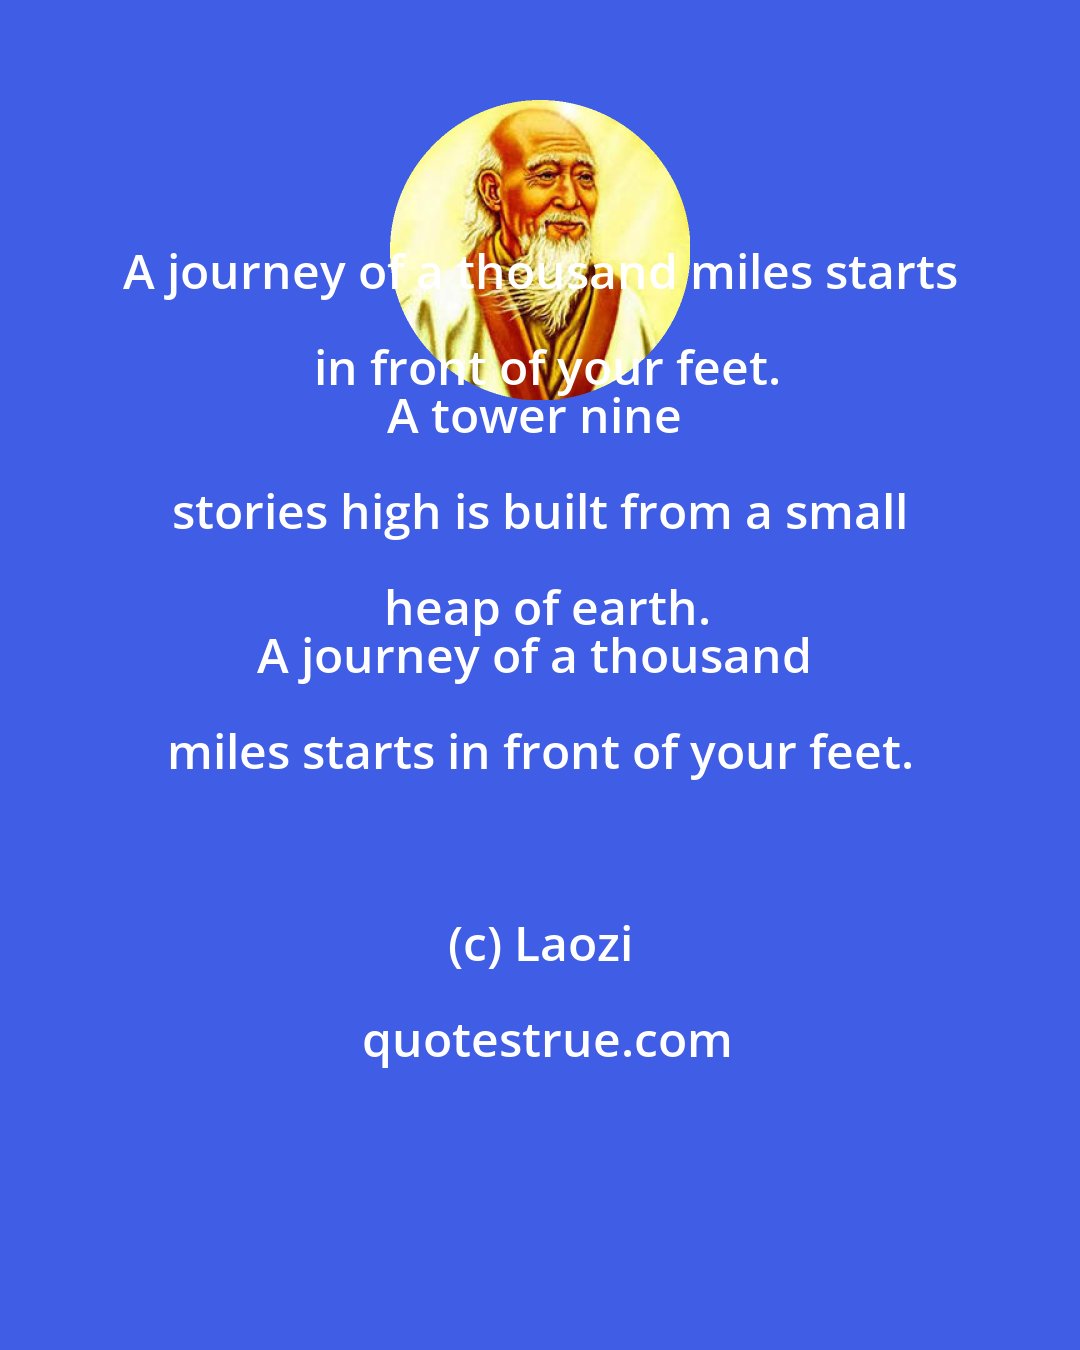 Laozi: A journey of a thousand miles starts in front of your feet.
A tower nine stories high is built from a small heap of earth.
A journey of a thousand miles starts in front of your feet.